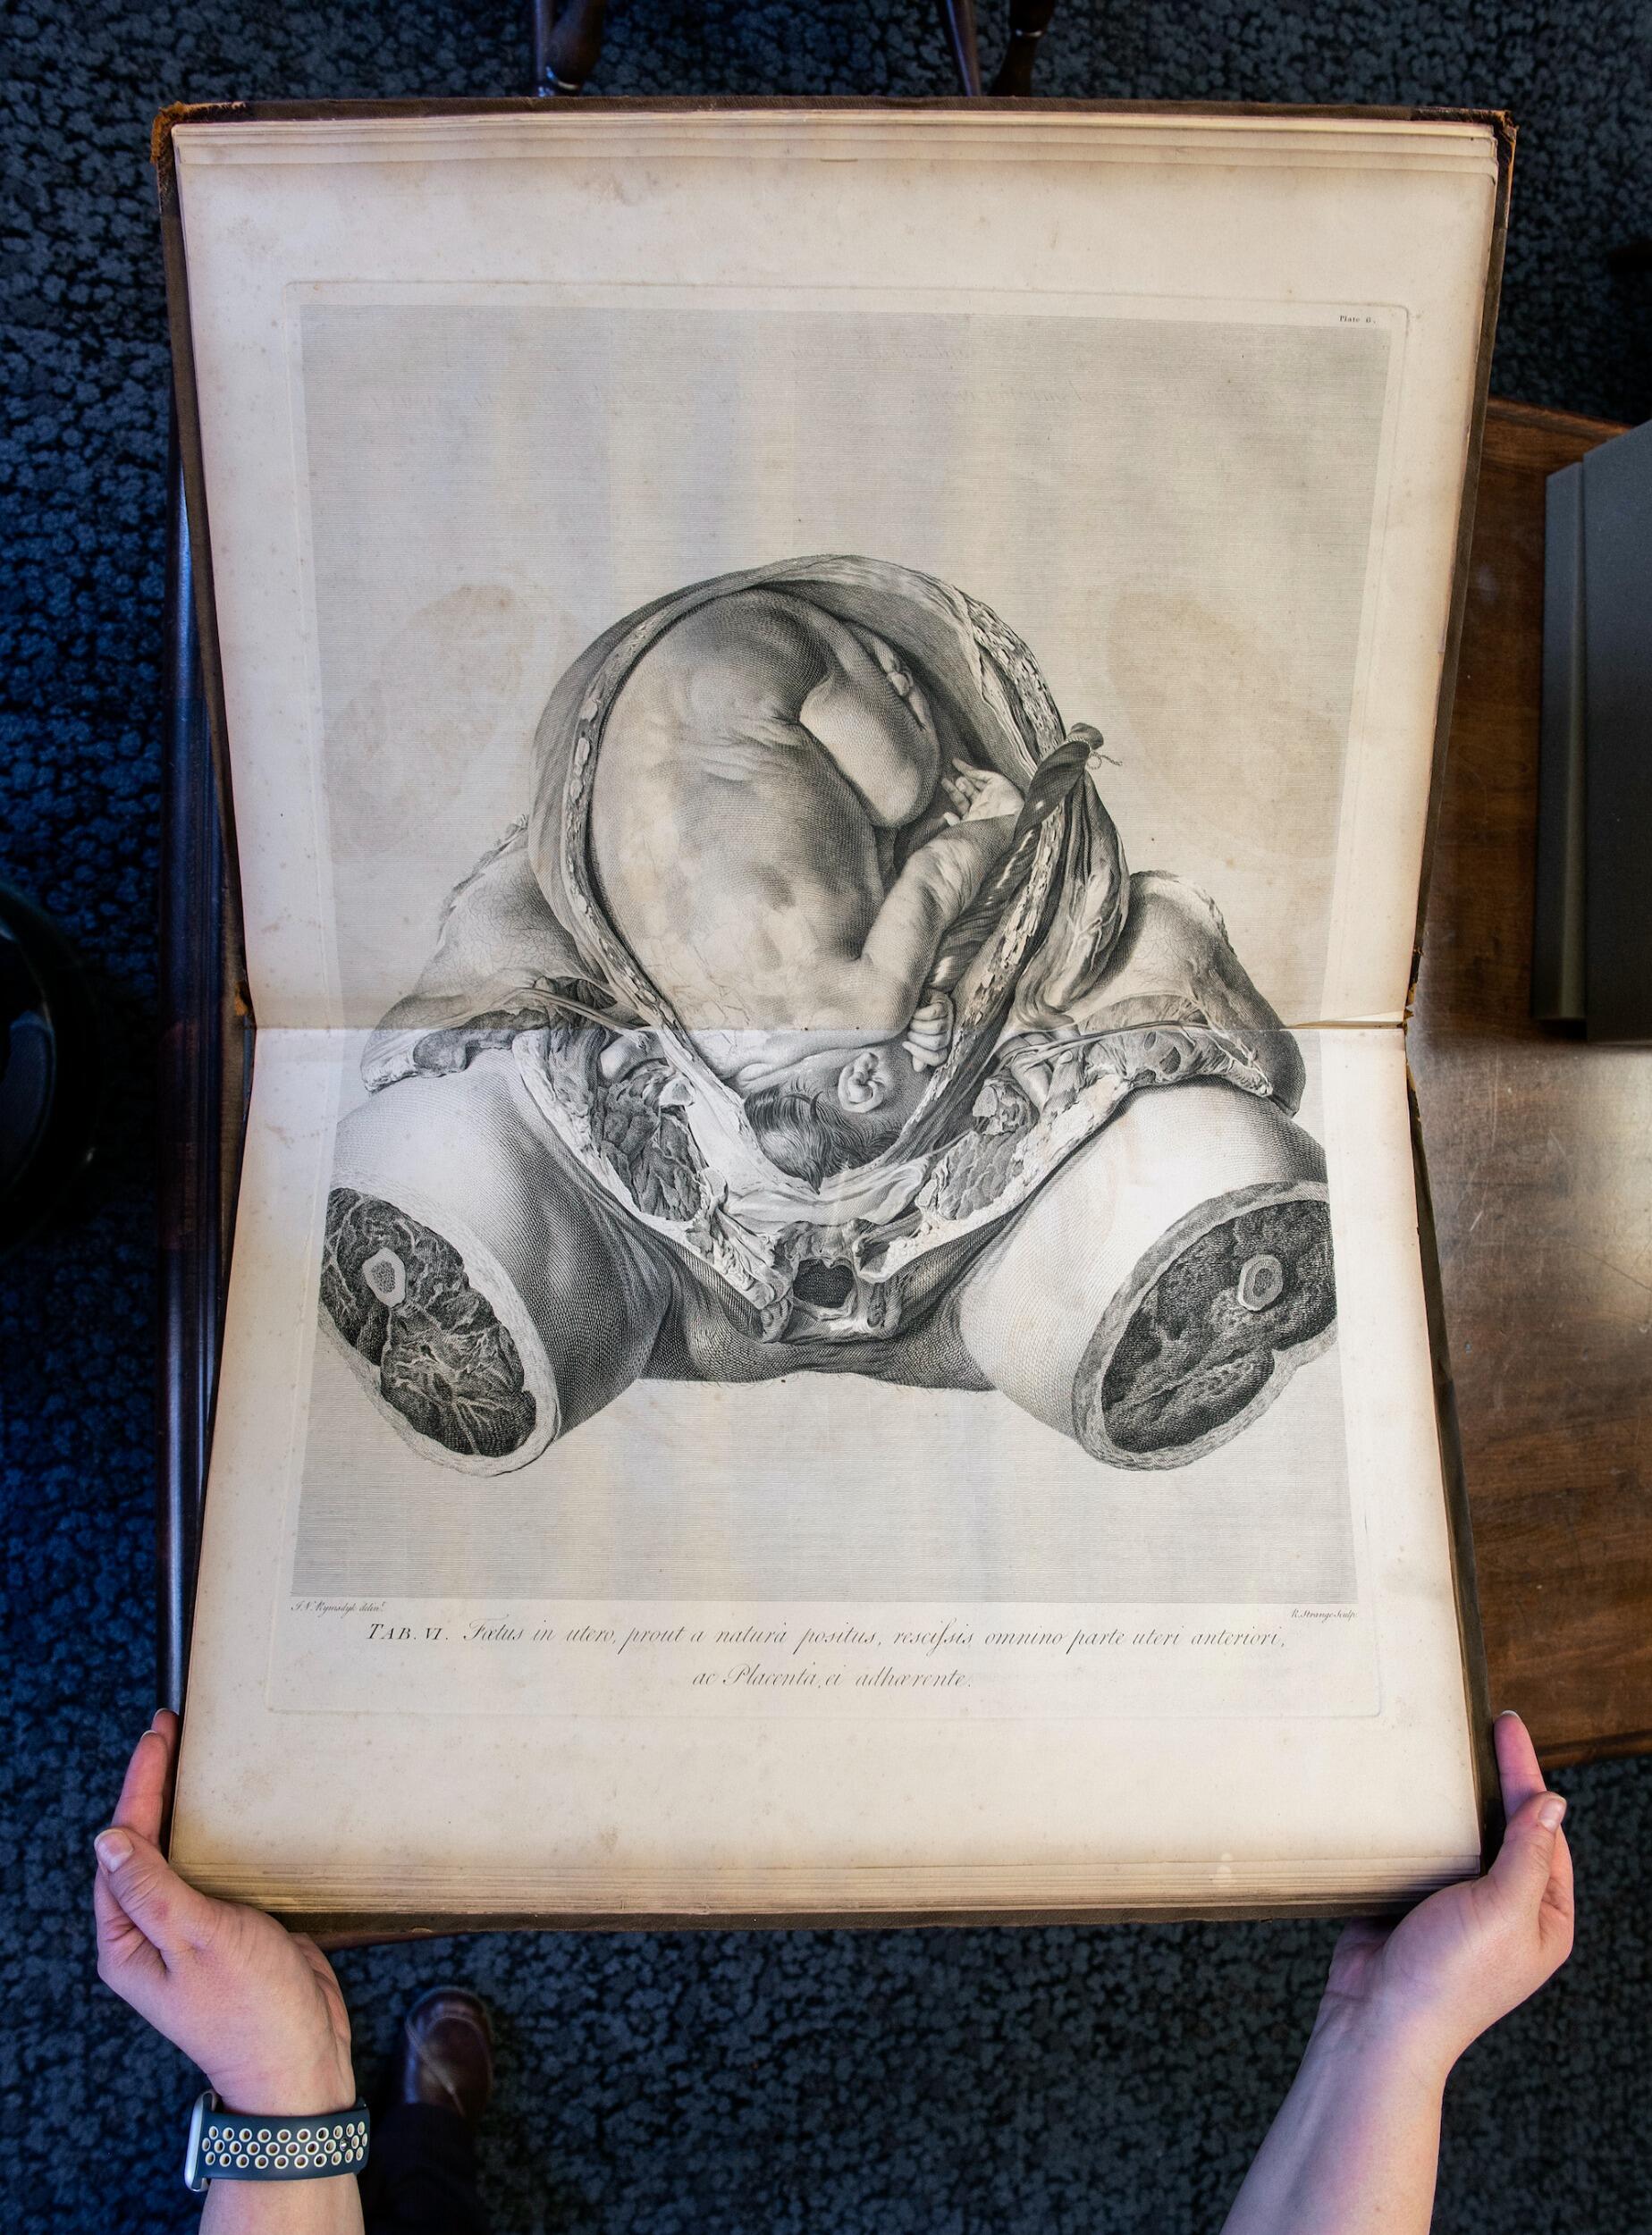 19th century medical illustration showing a fetus in utero 